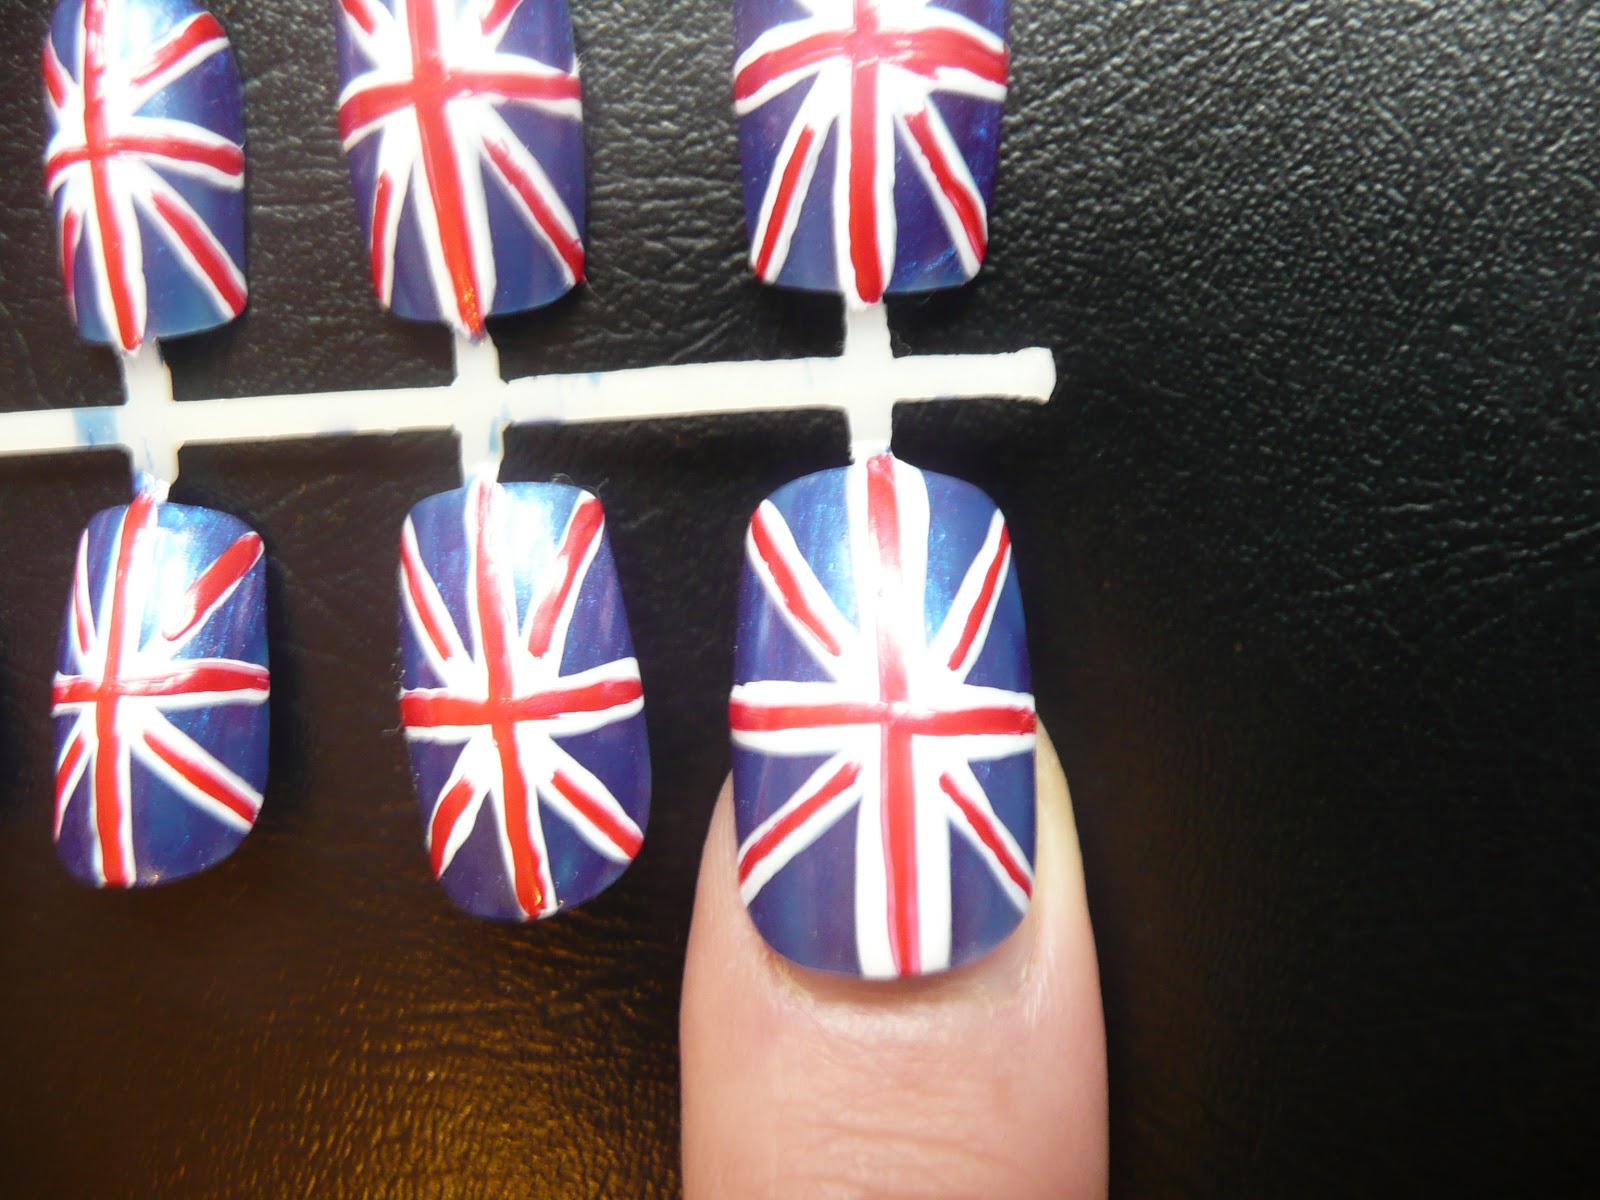 What other designs do you think I should try for the Queens Jubilee?